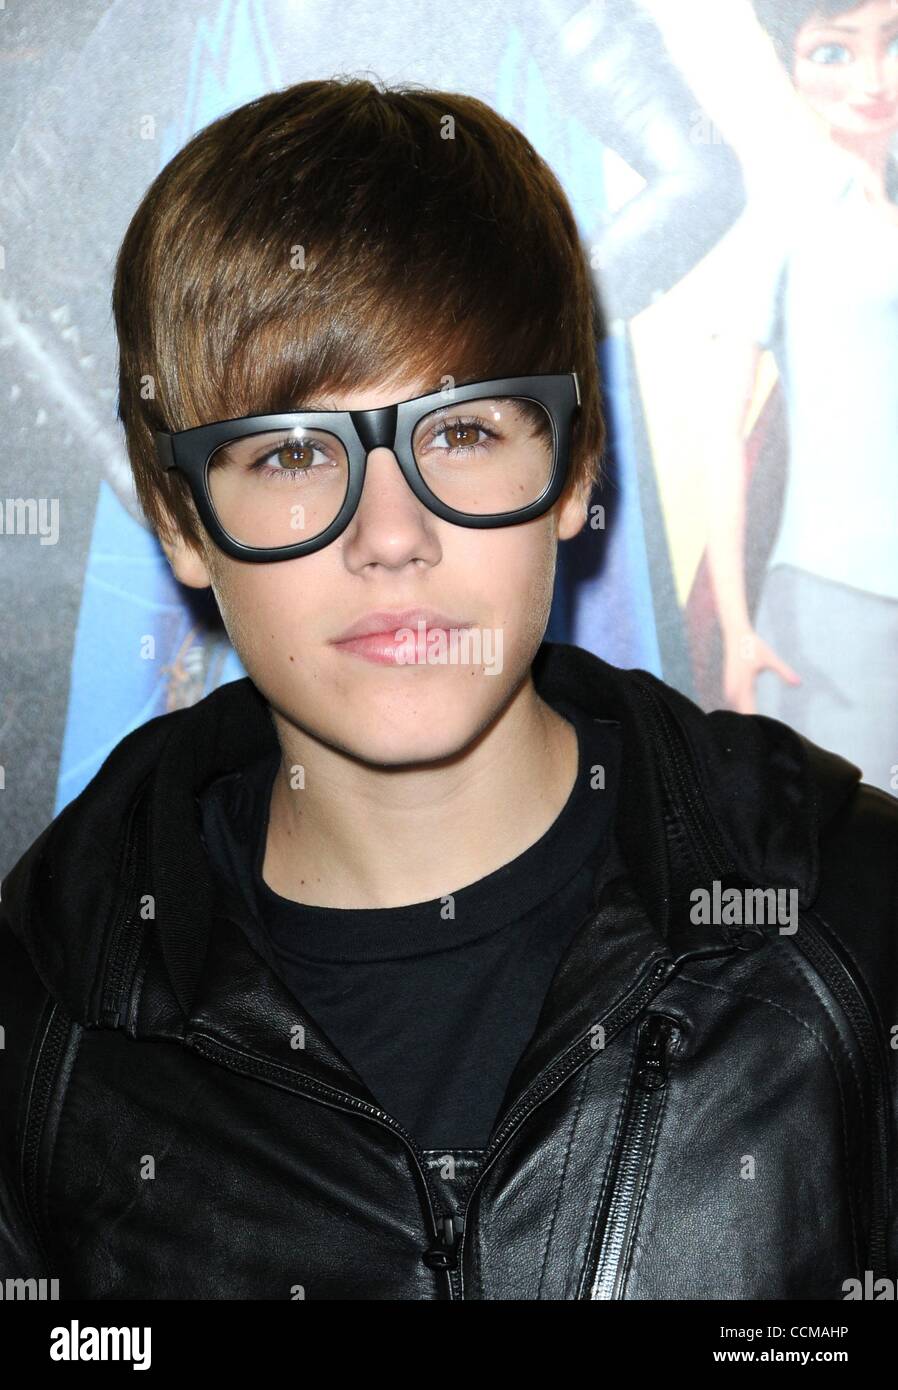 Oct 30, 2010 - Los Angeles, California, USA - Singer JUSTIN BIEBER  at the 'Megamind' Los Angeles Premiere held at Mann's Chinese Theater, Hollywood. (Credit Image: © Jeff Frank/ZUMApress.com) Stock Photo